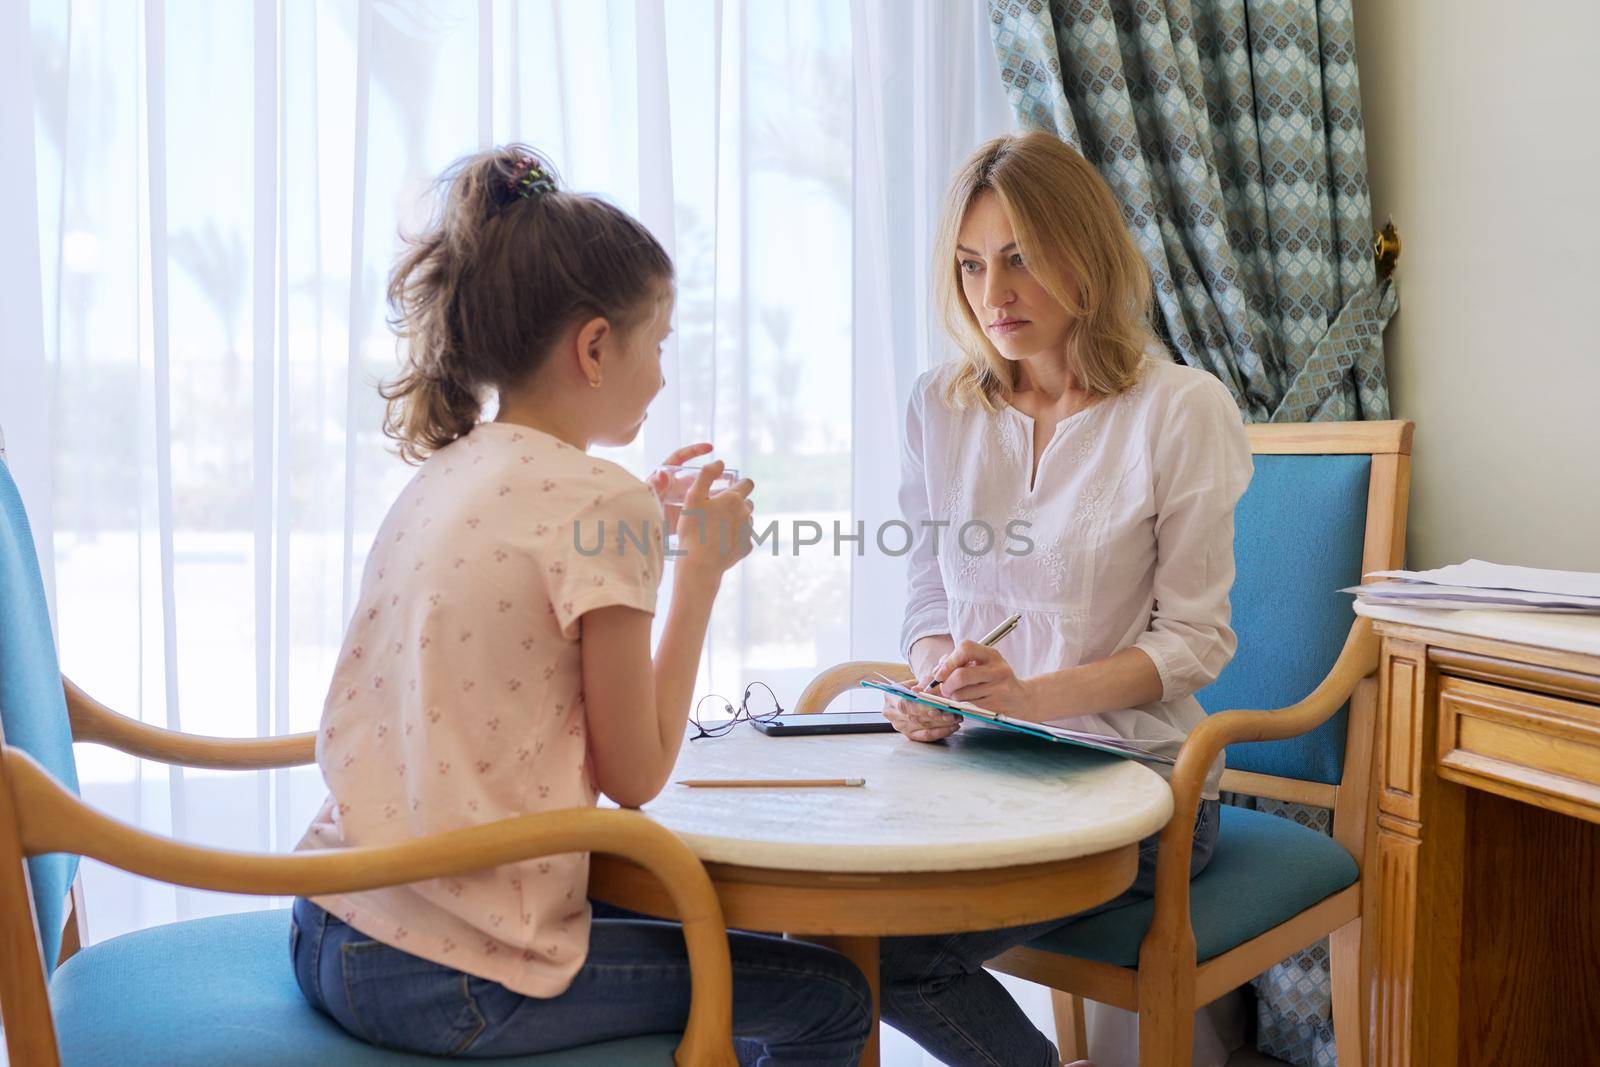 Child girl at session with social worker, school psychologist in an office. Child psychology, professional help, mental health of children, conversation between counselor and preteen girl